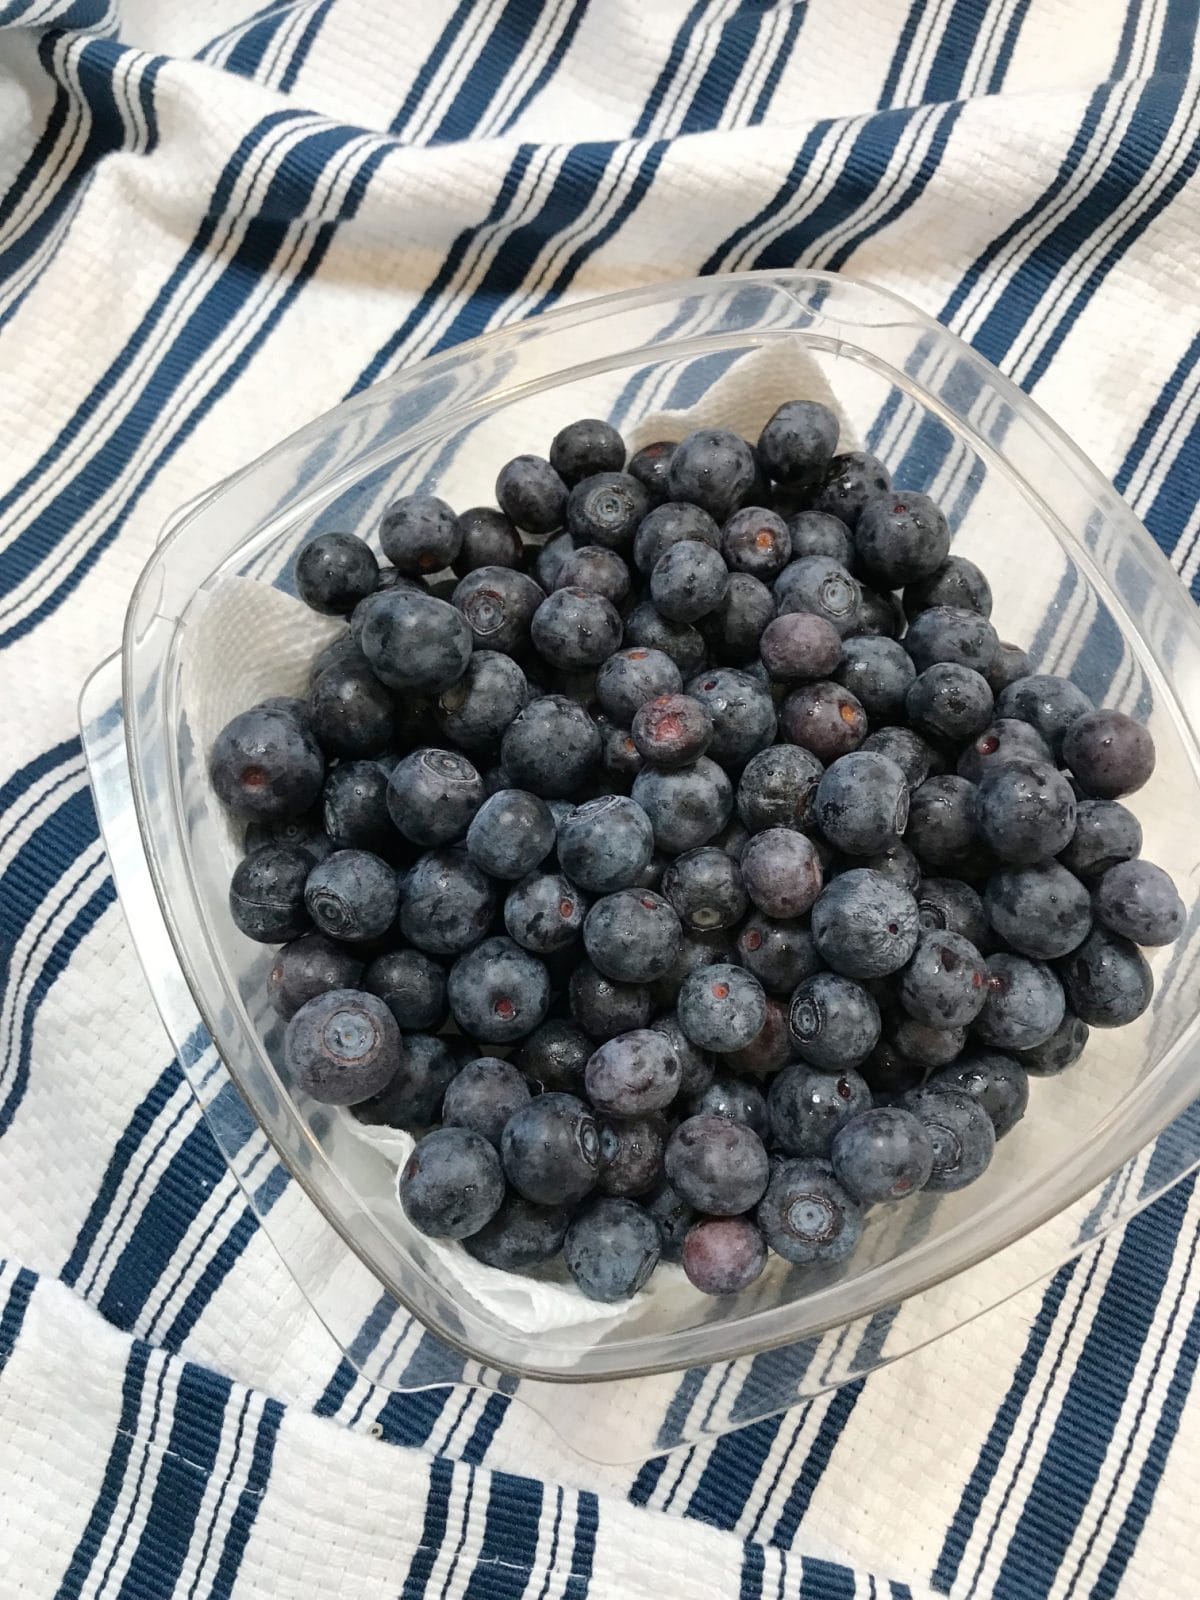 How to keep blueberries fresh